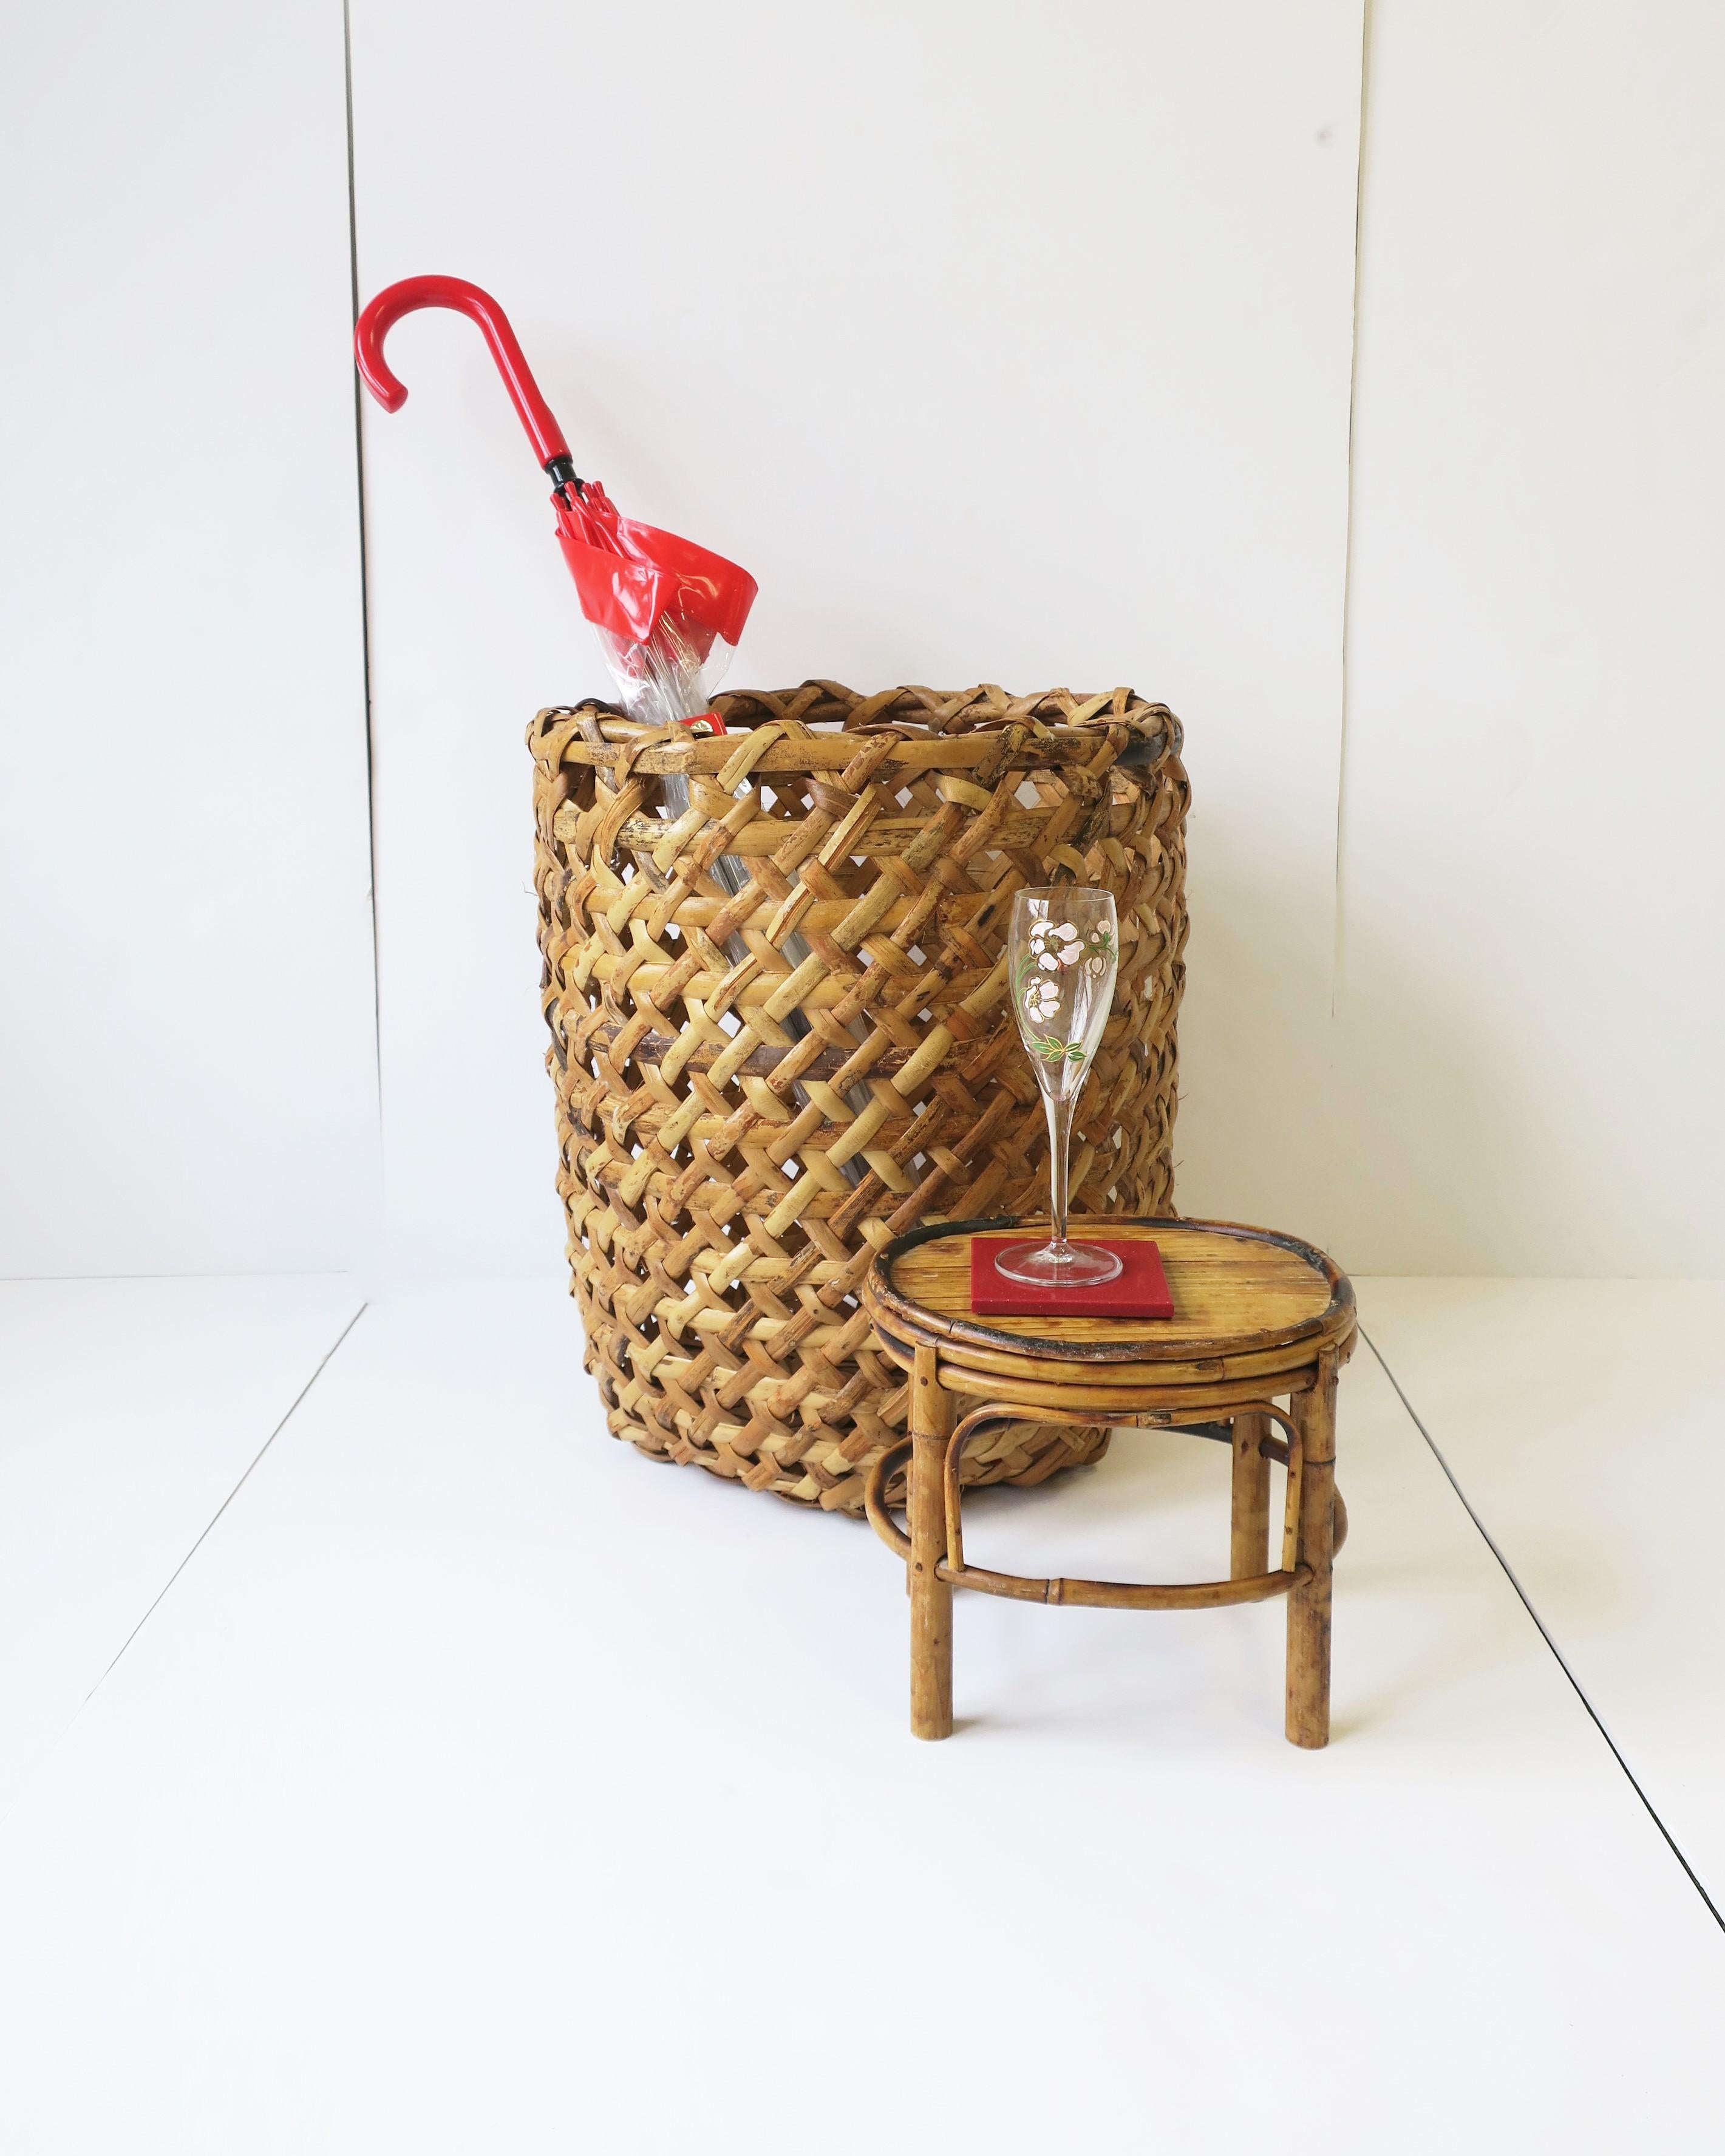 Chinese Wicker Bamboo Table or Plant Stand, Small For Sale